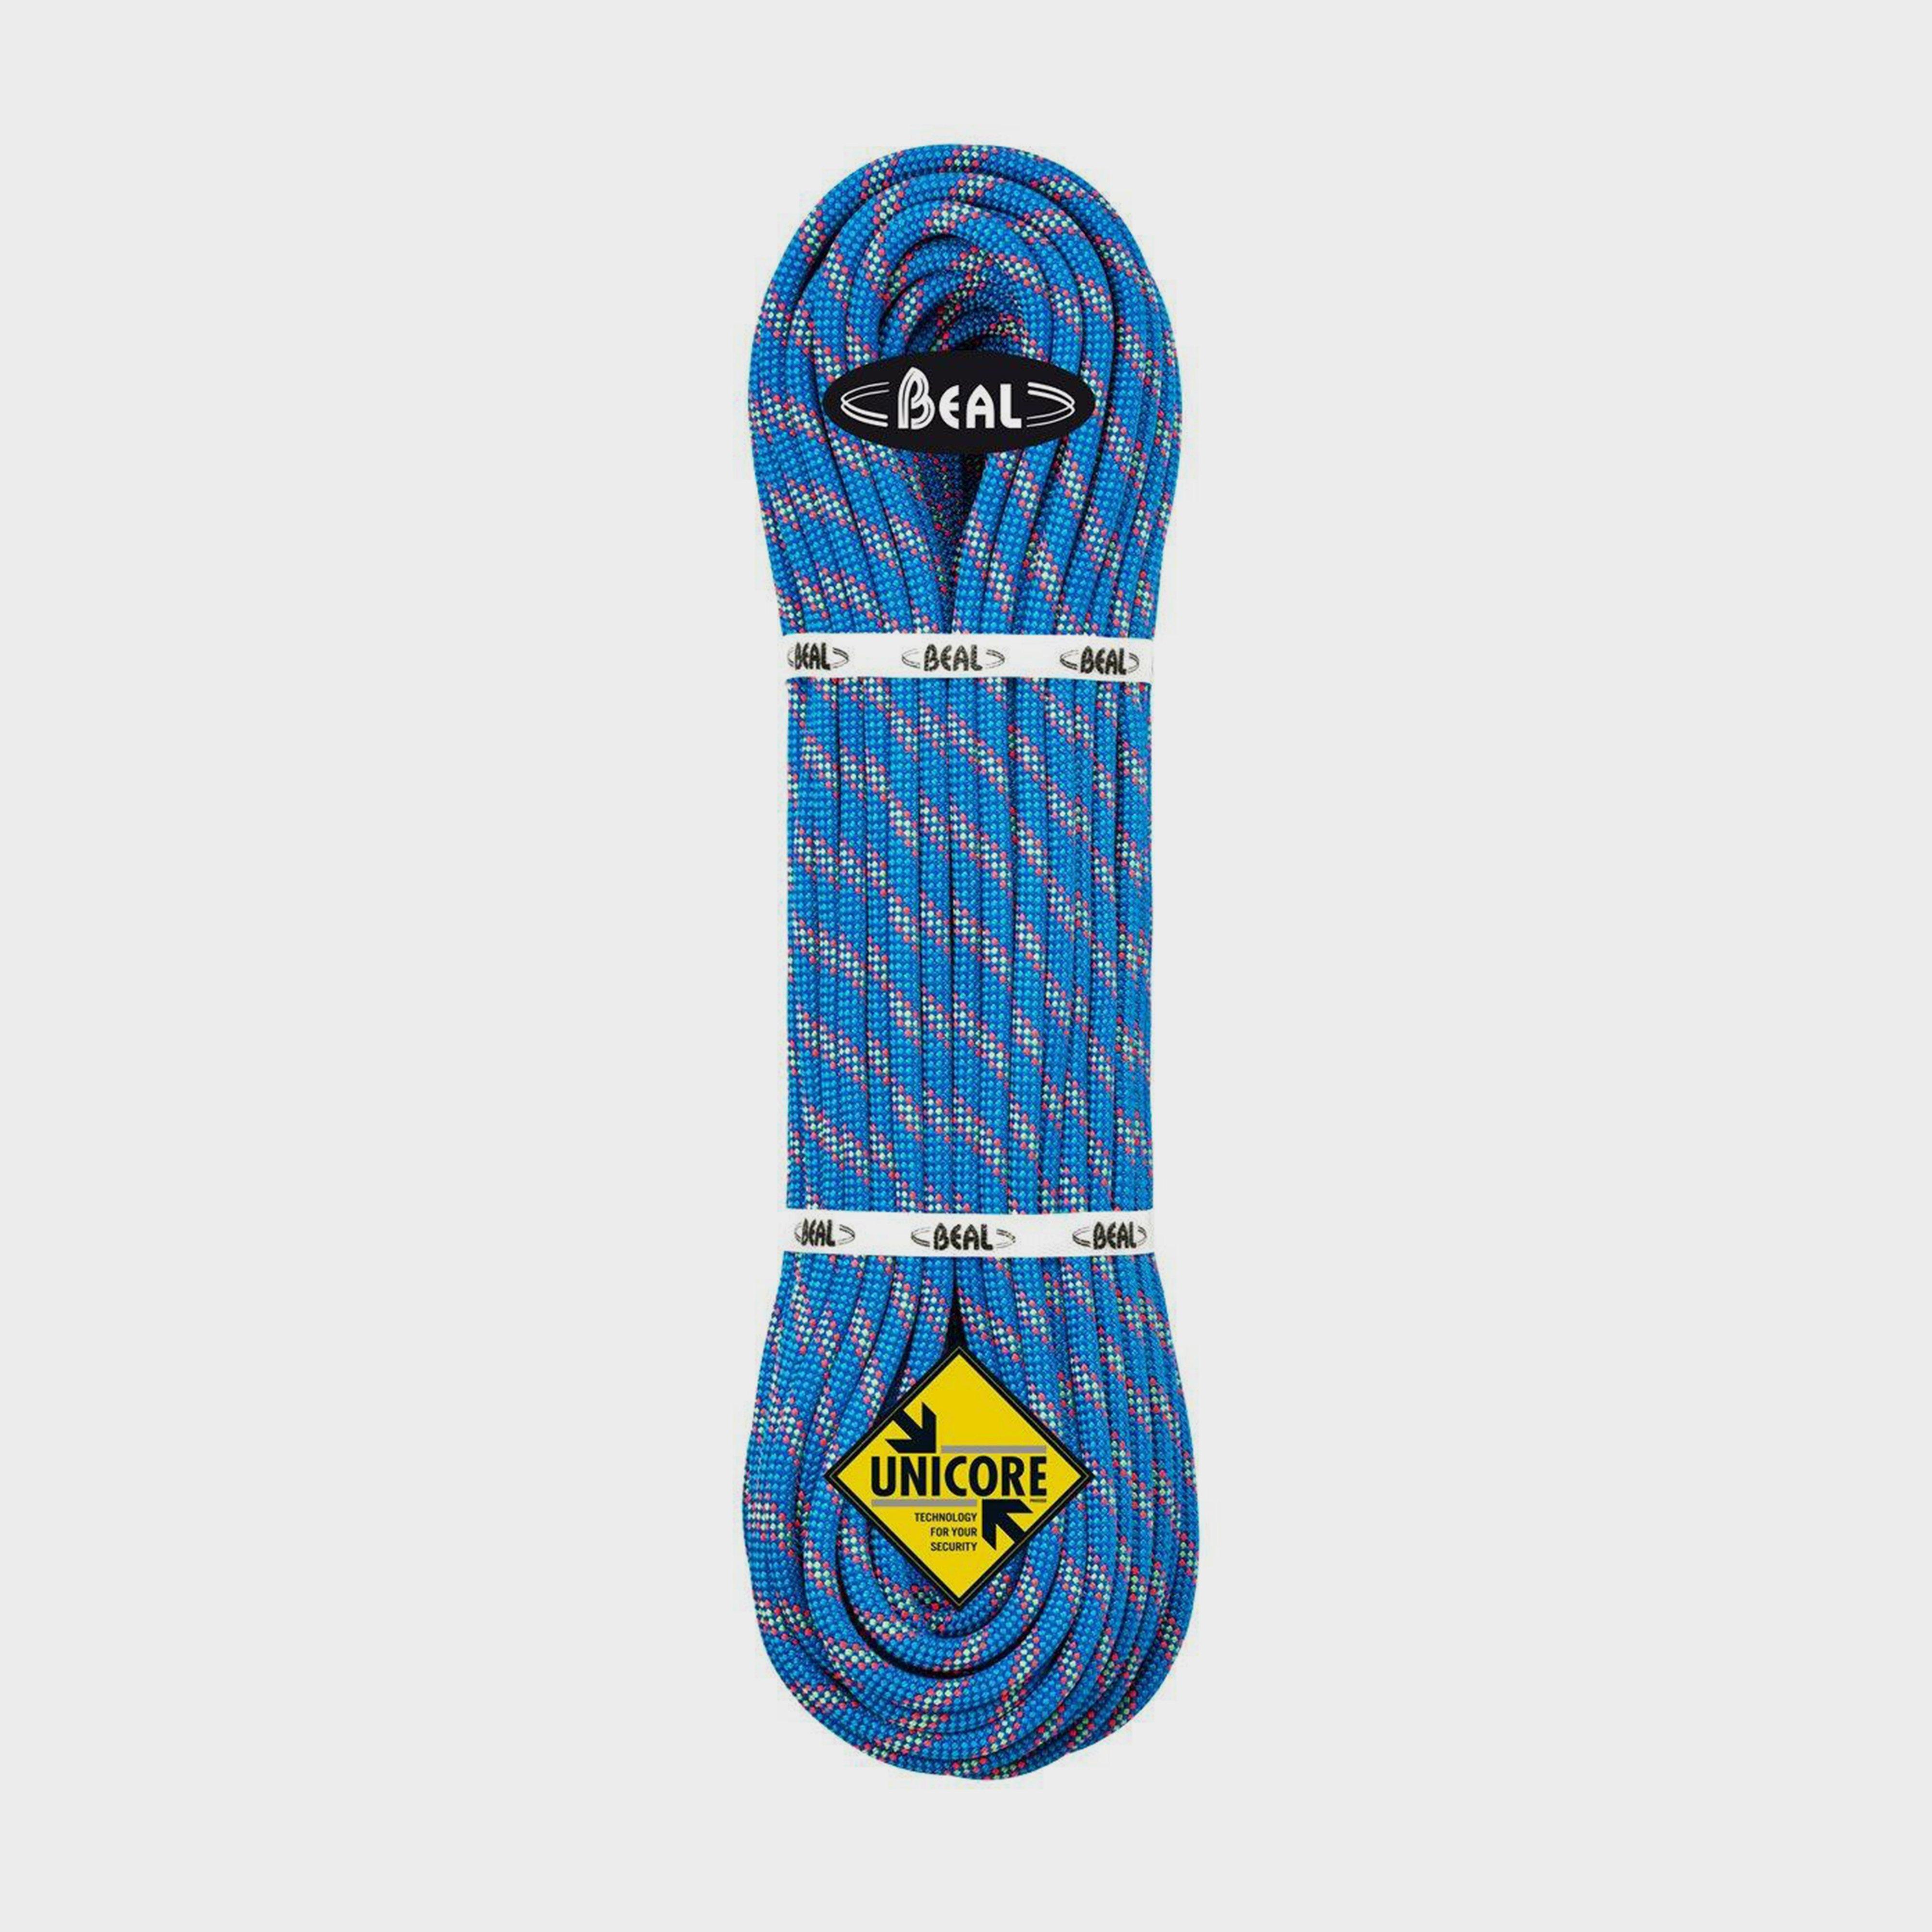  Beal Booster III 9.7mm Dry Cover Climbing Rope (70m)